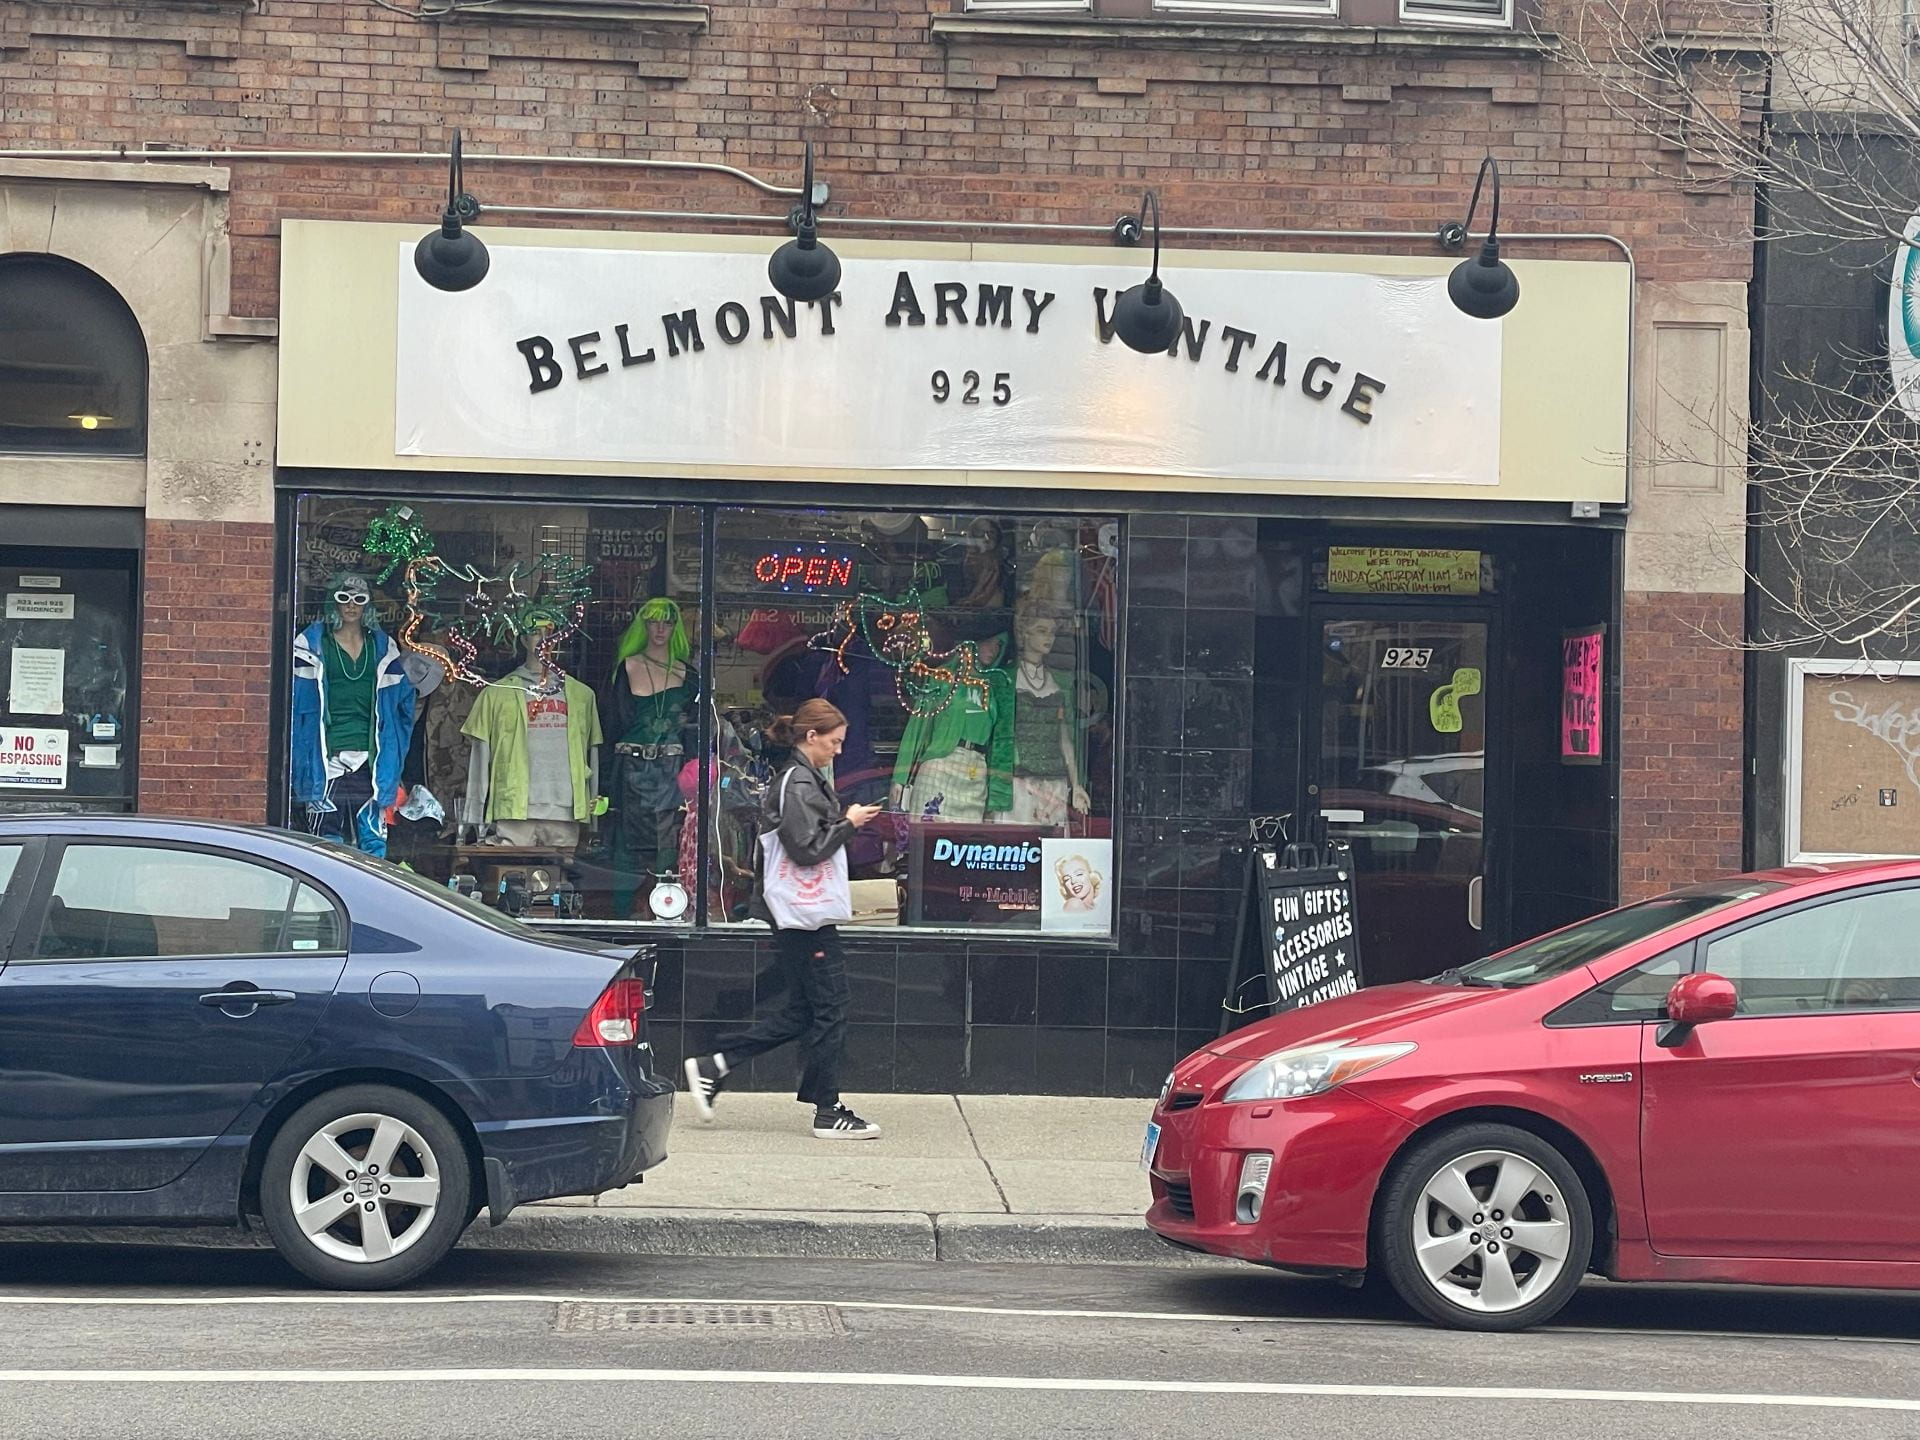 A photo showing the storefront of Belmont Army Vintage, a vintage and thrift store located on Belmont Ave. in Chicago.